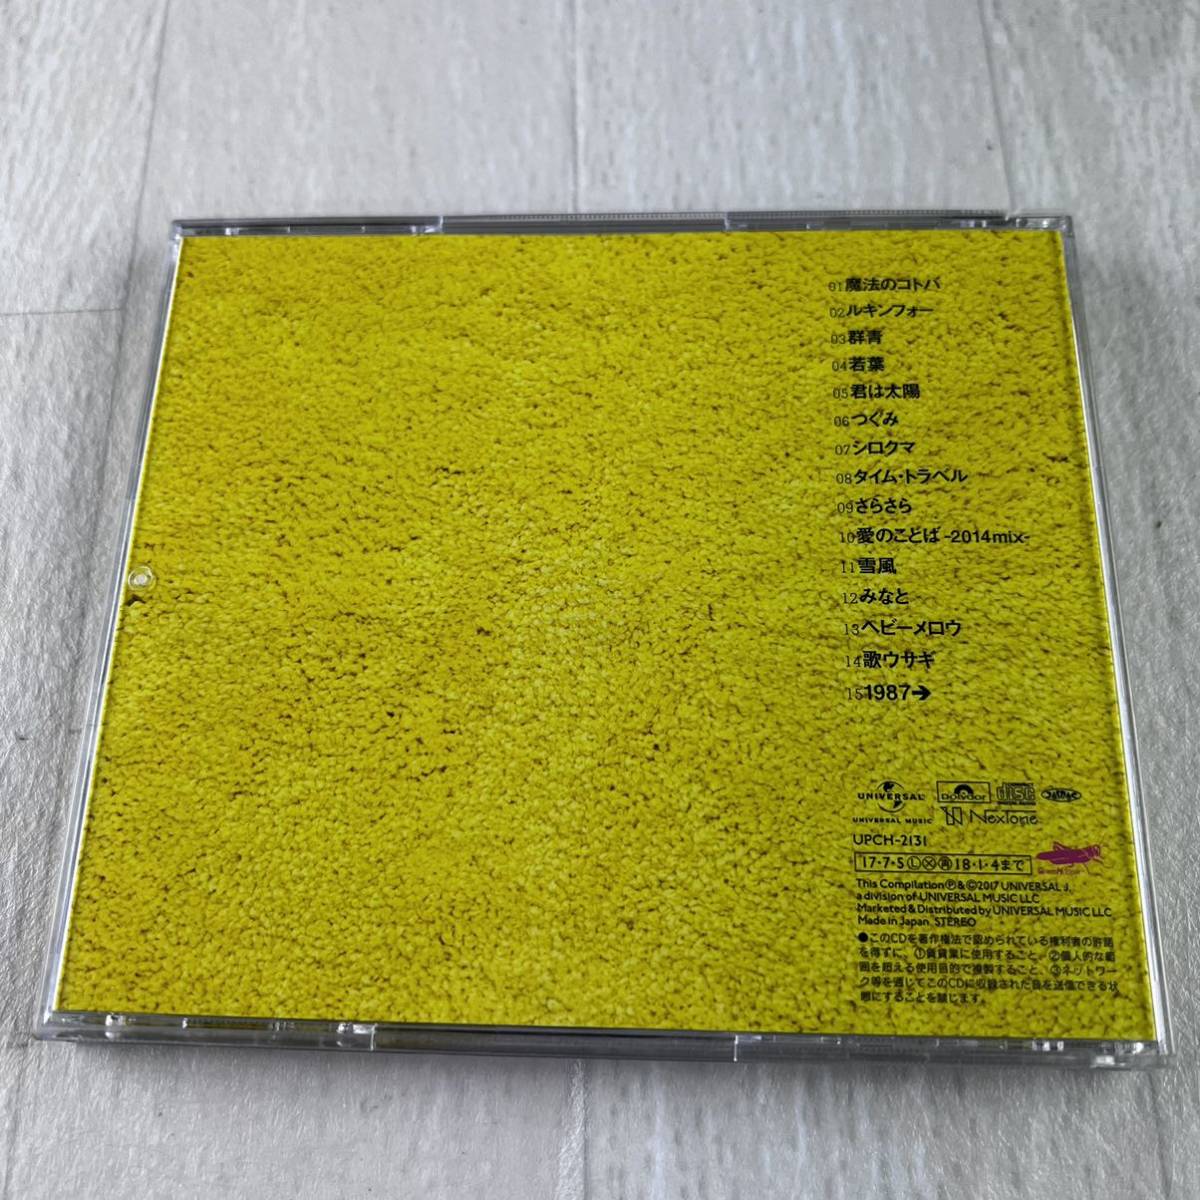 Spitz CYCLE HIT 2006-2007 Spitz Complete Single Collection CD スピッツ_画像4